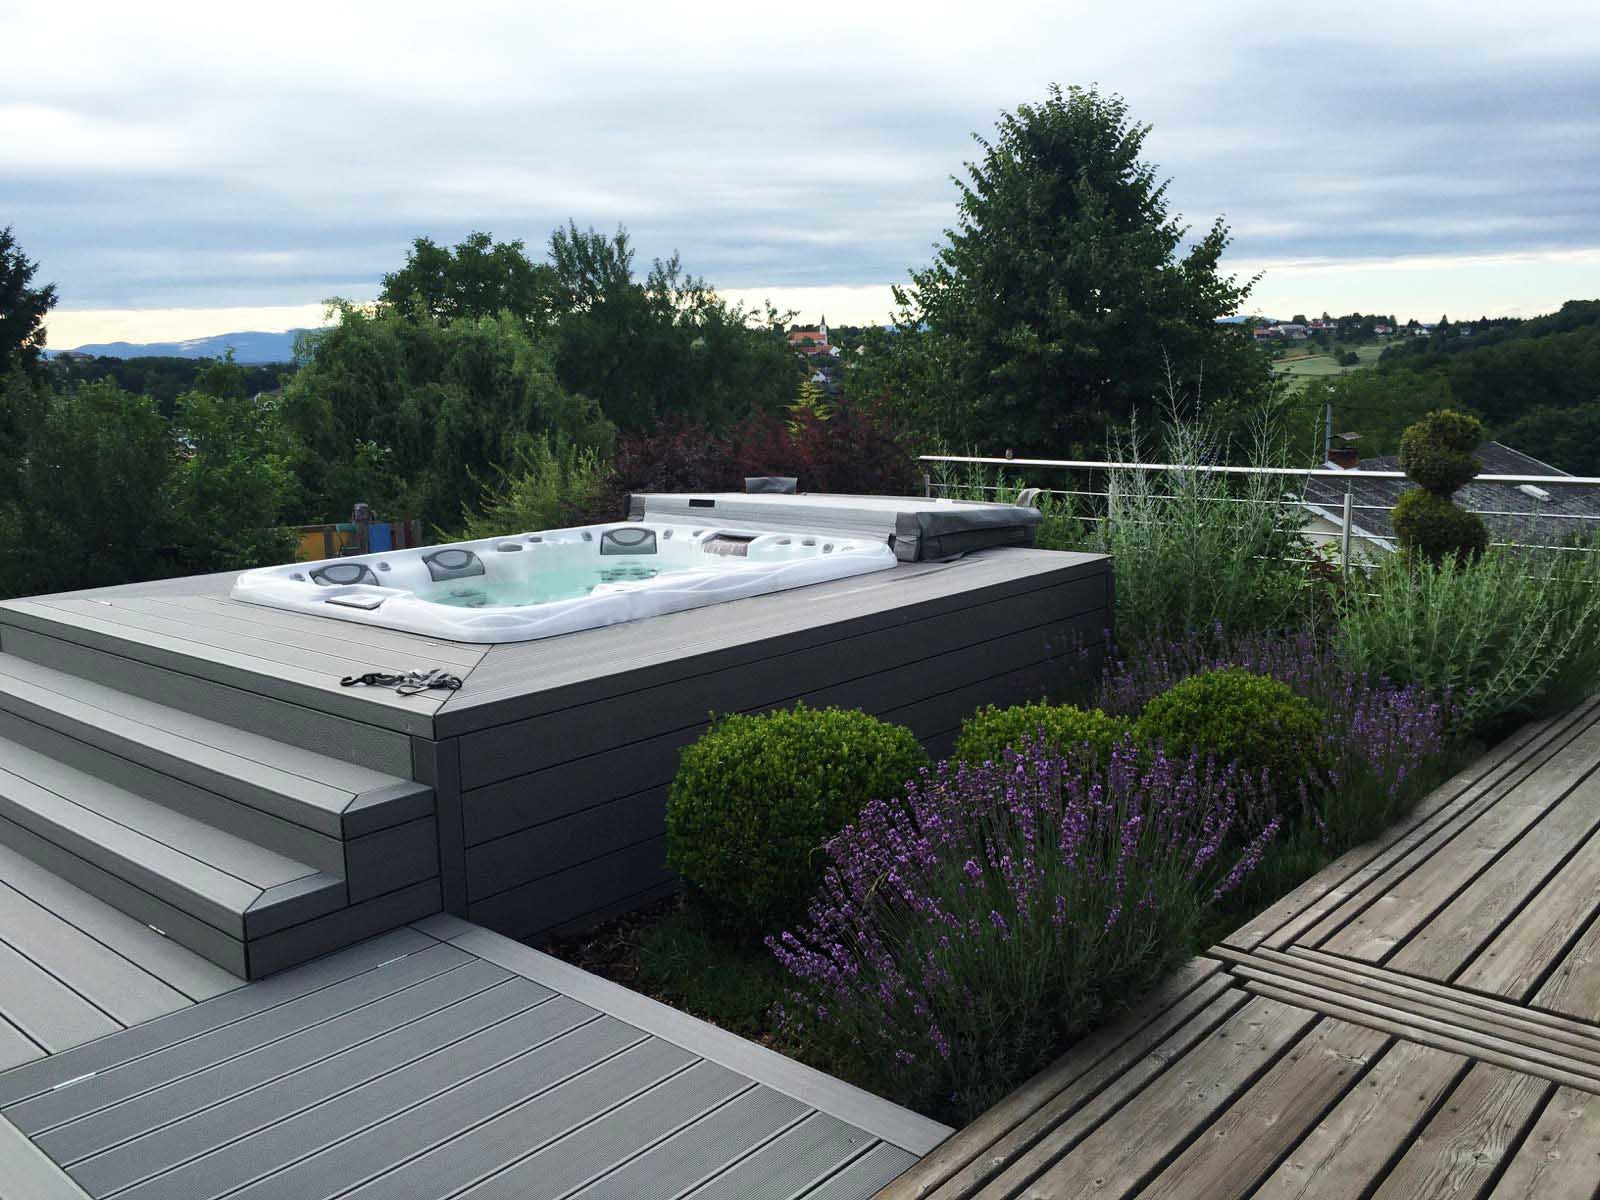 Outdoor hot tub installation on a deck.